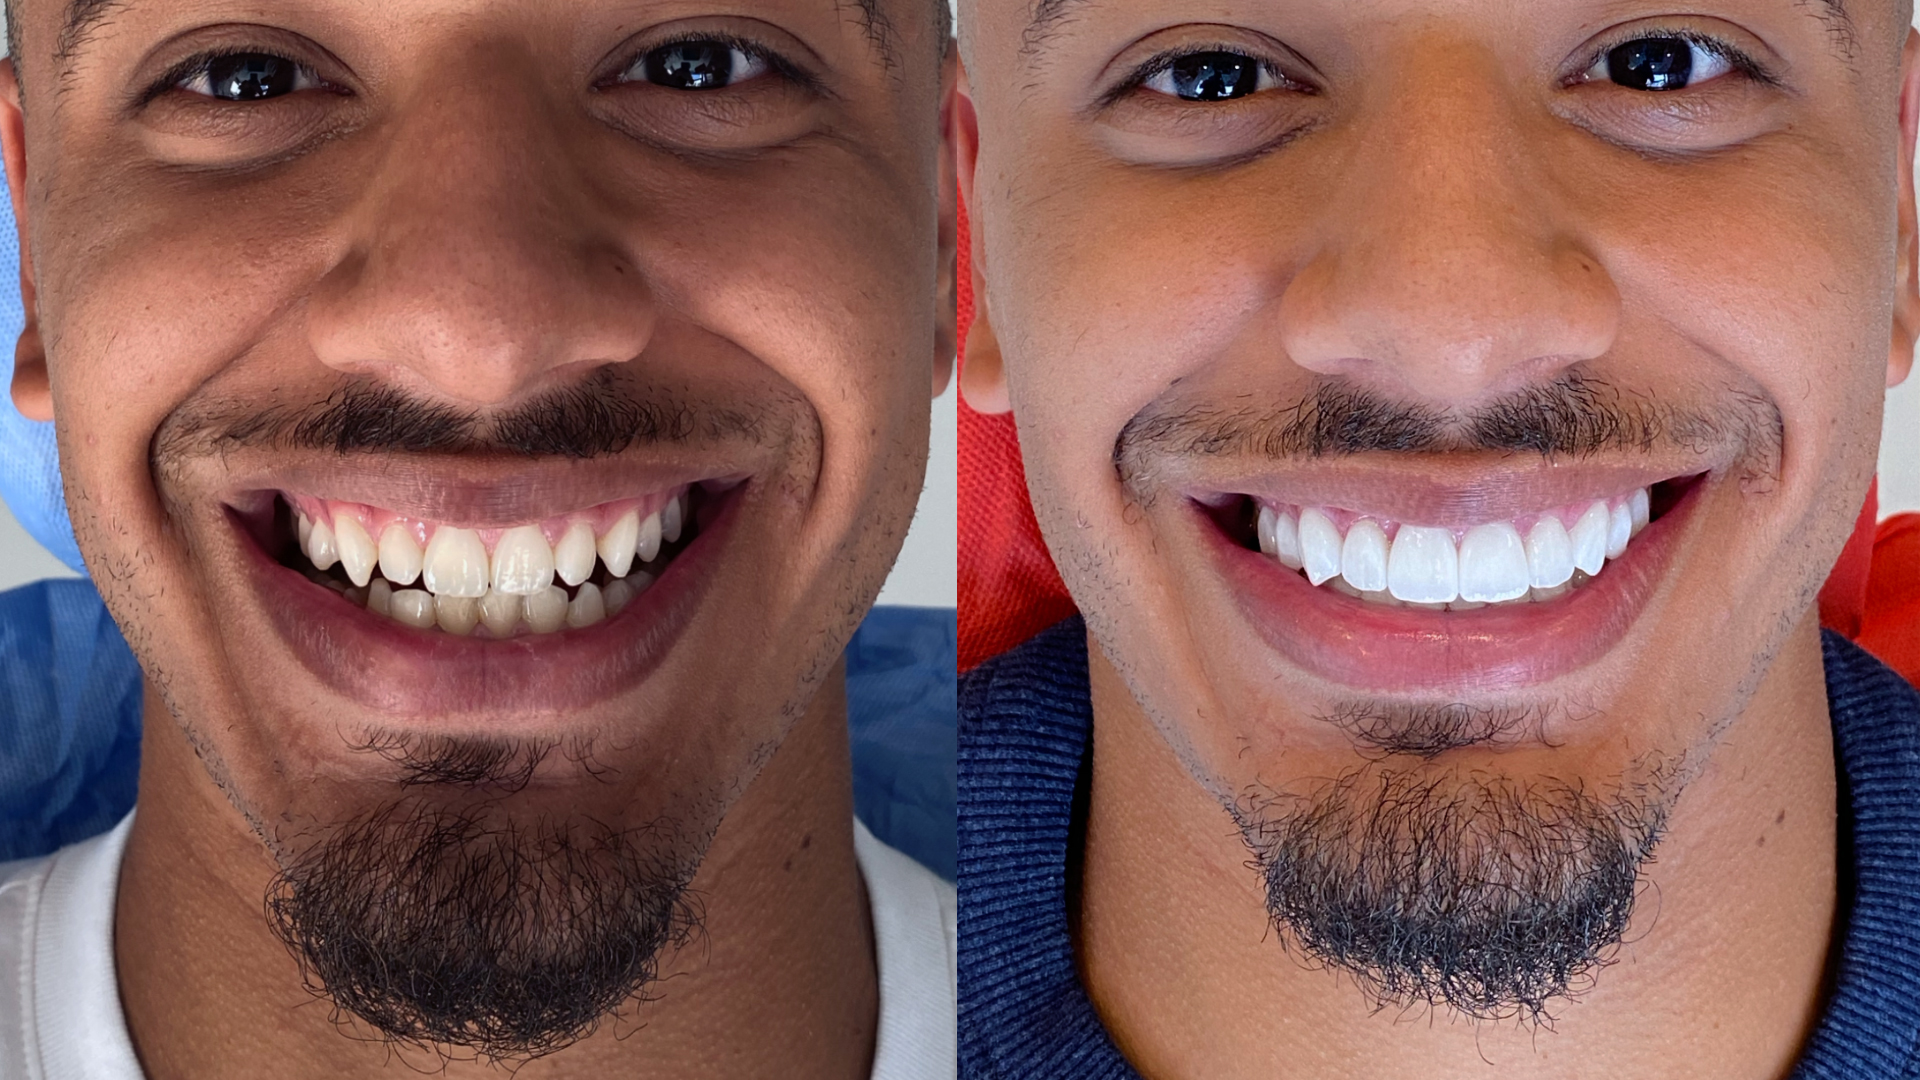 This bright smile is the result of a “Hollywood Smile” in Turkey